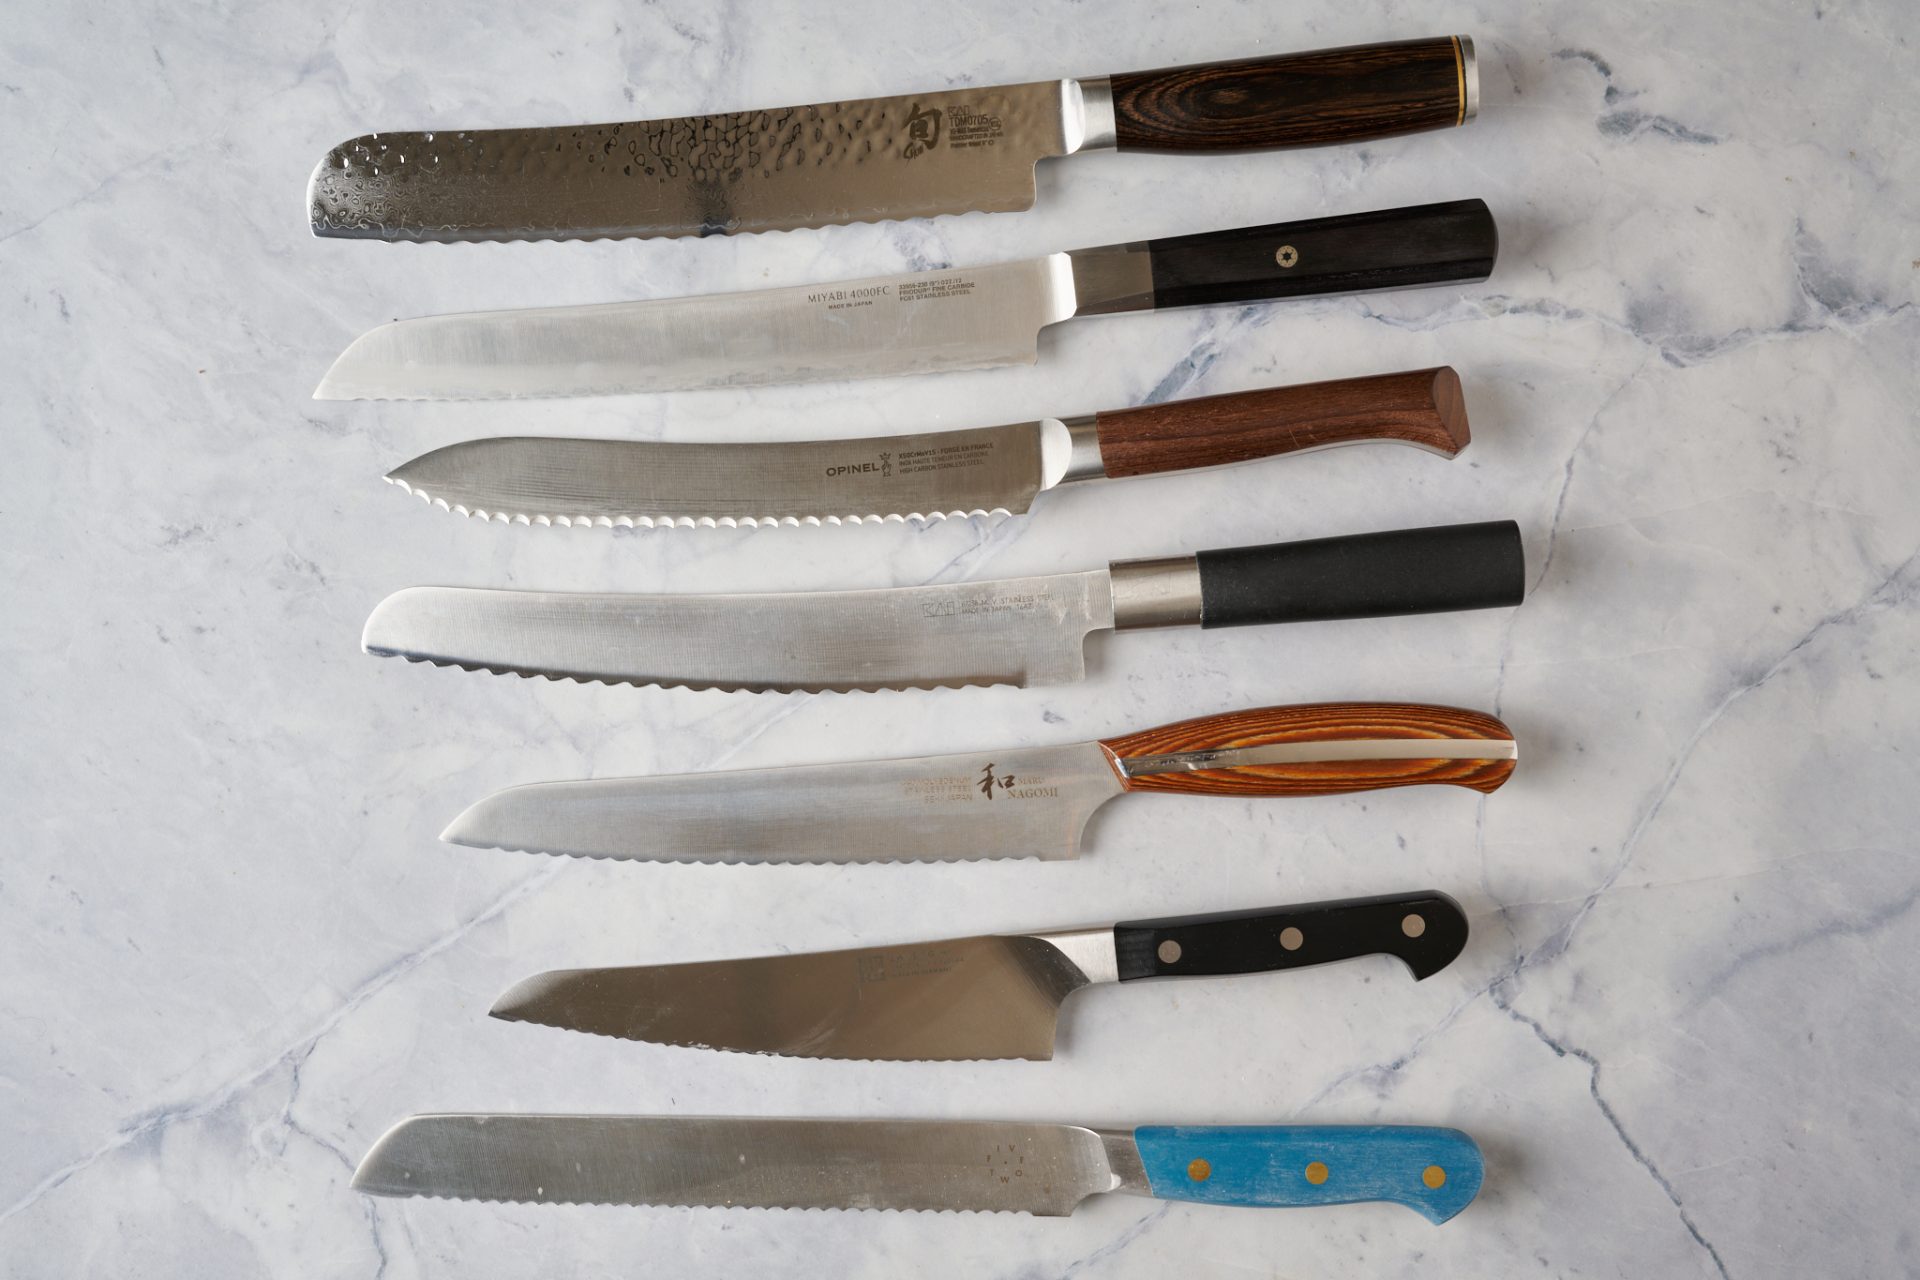 All of my bread knives